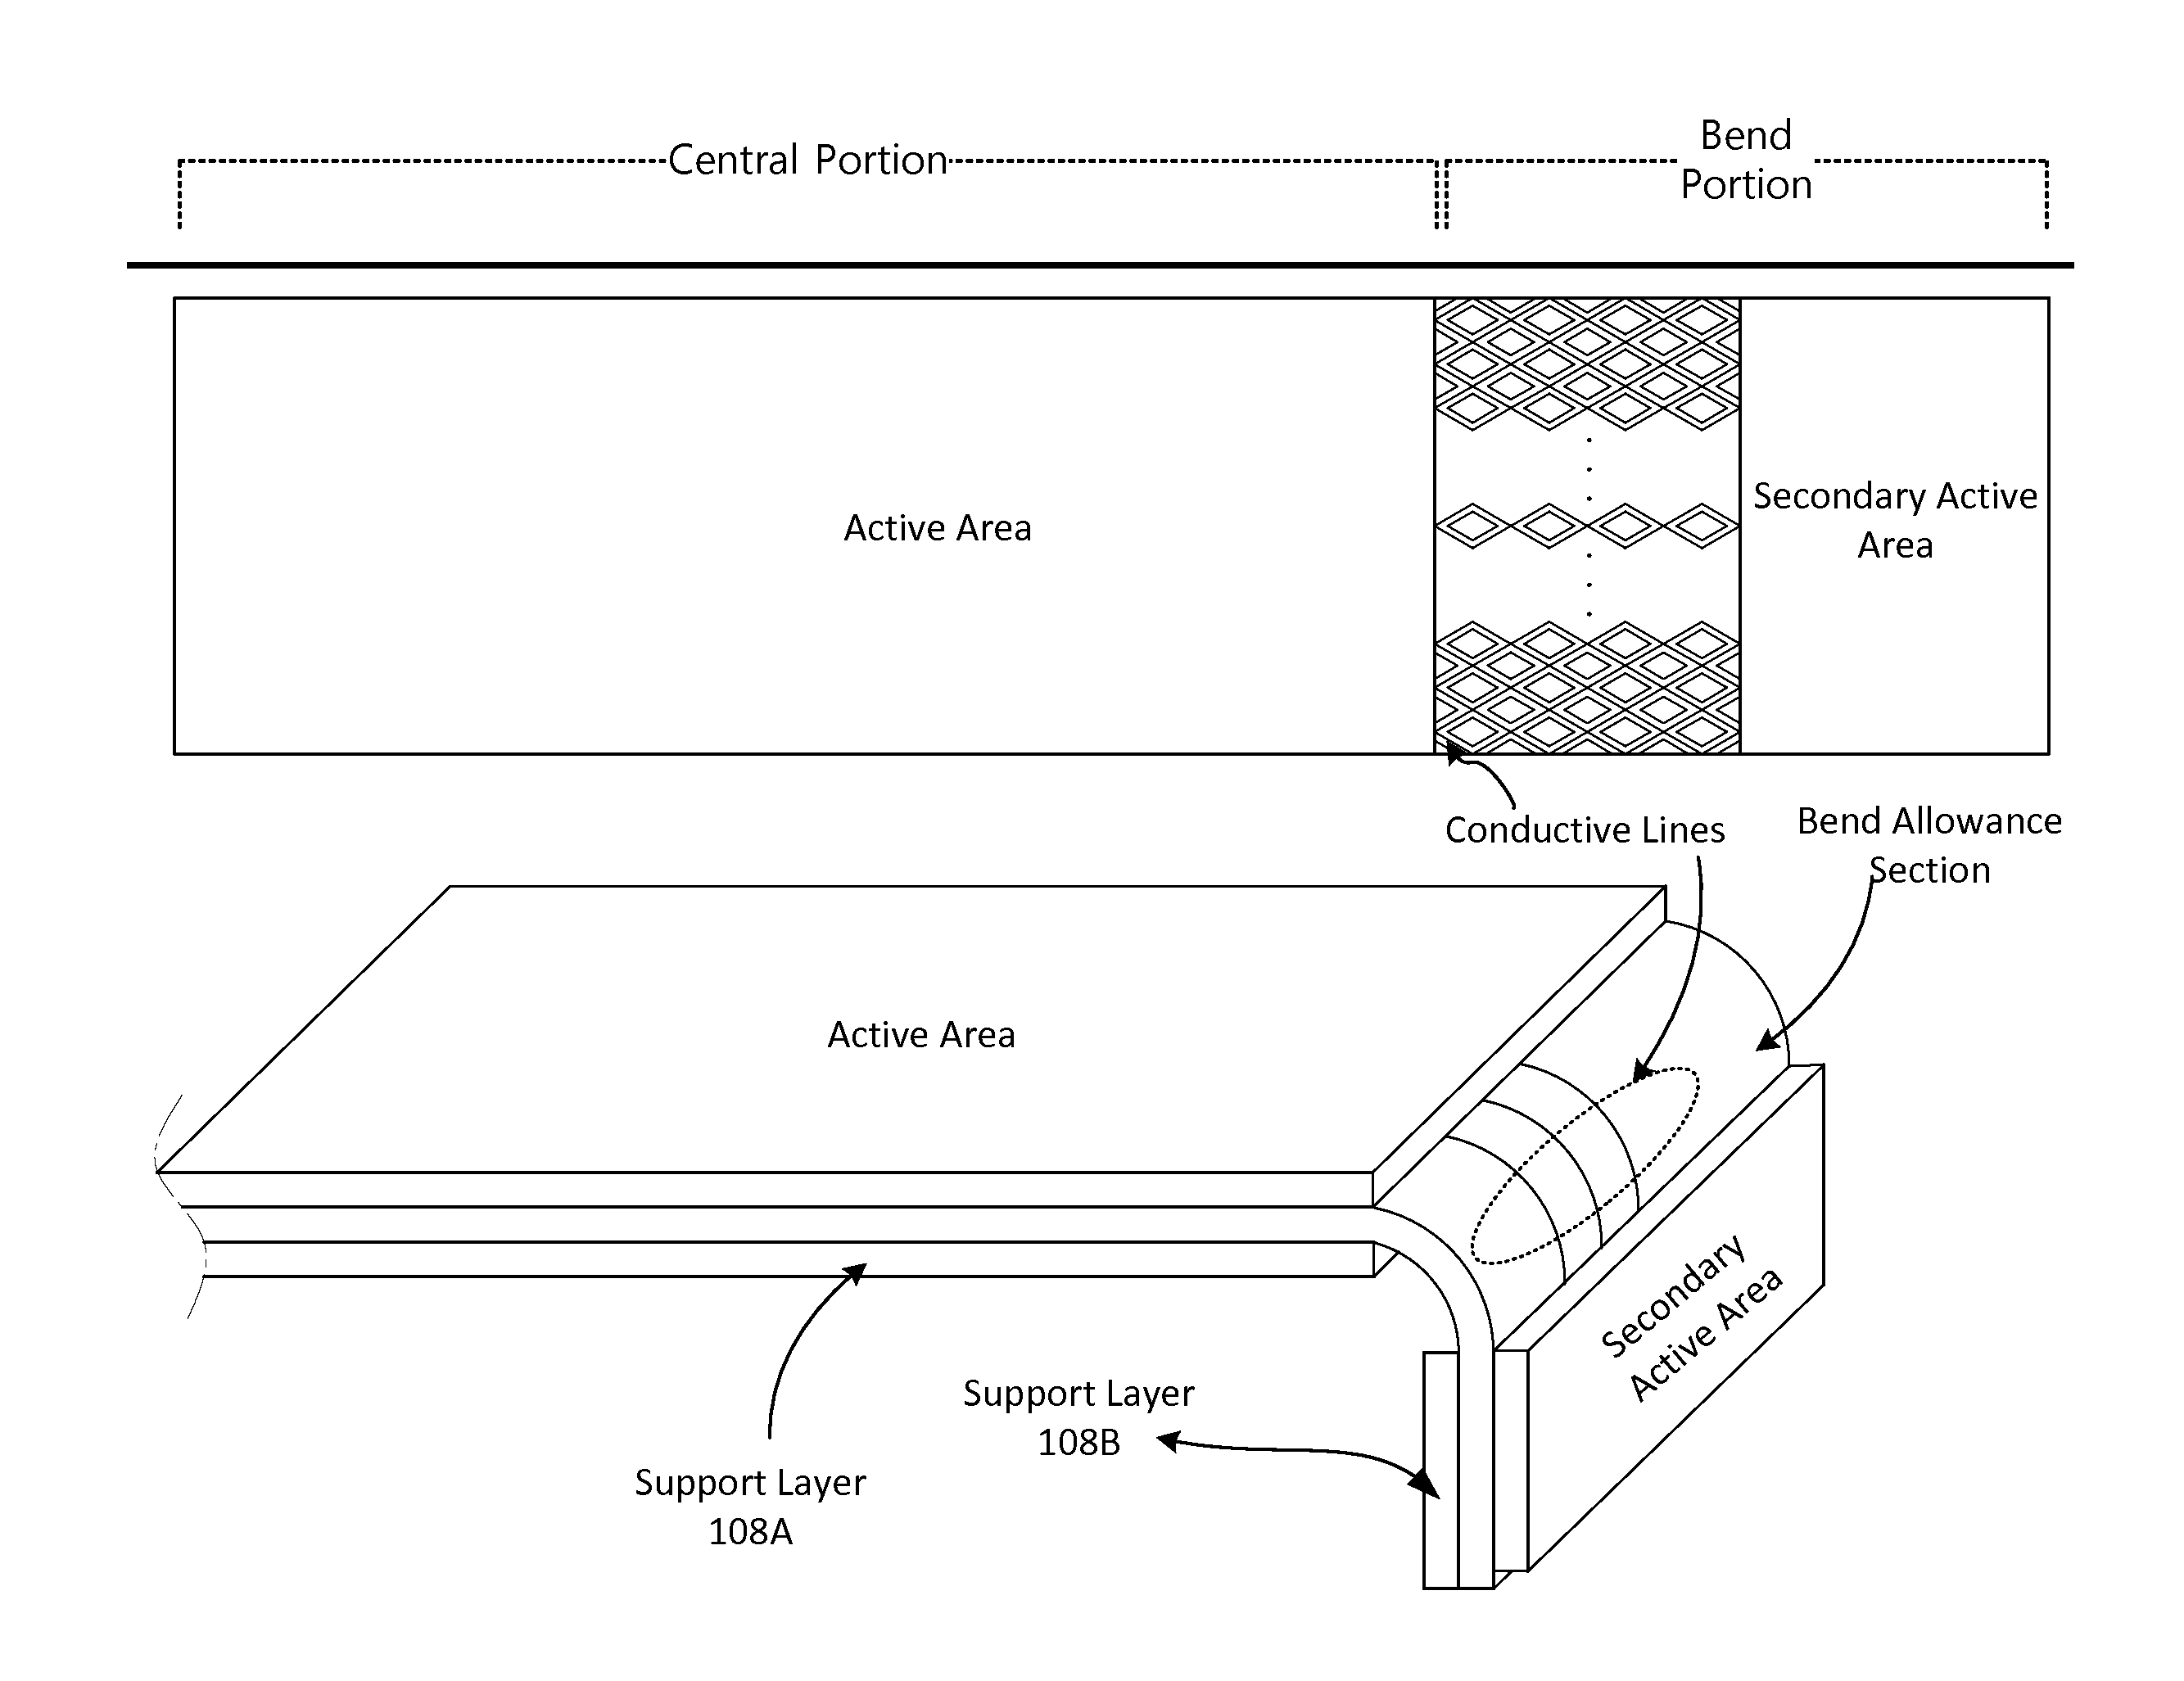 Flexible display device with multiple types of micro-coating layers